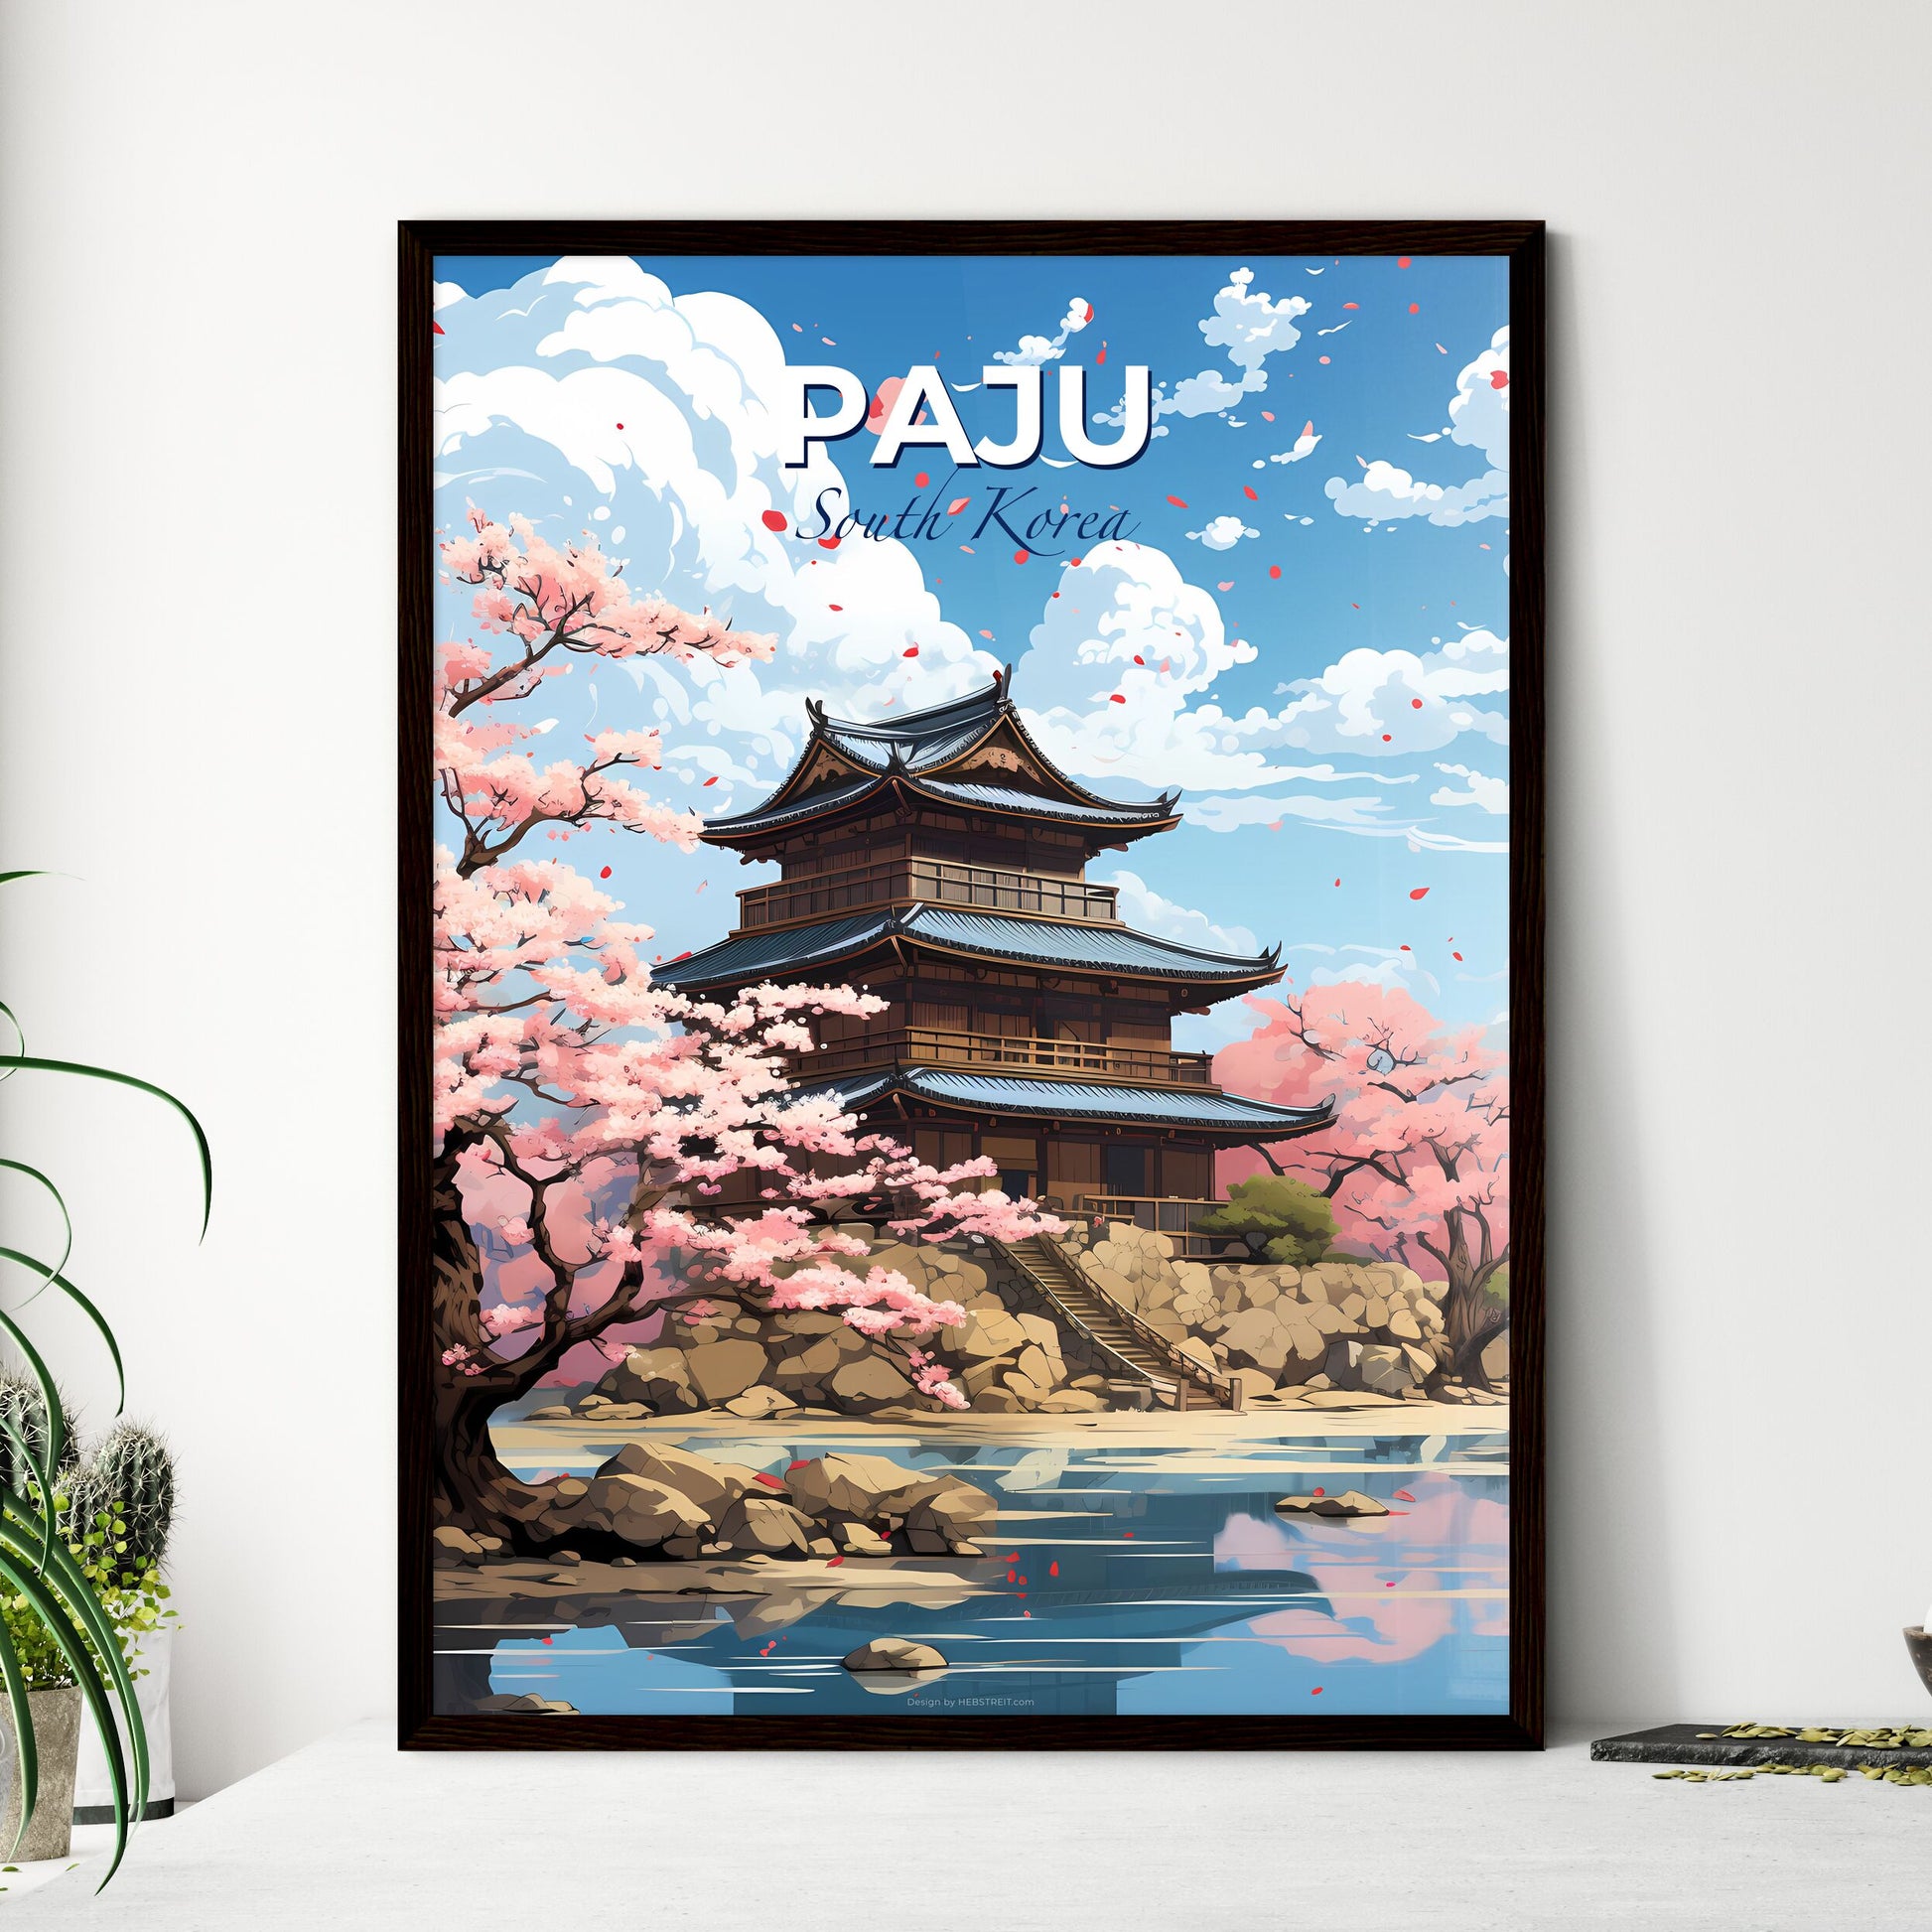 Colorful Korean Artwork of a Building on a Hill with Pink Trees and Water Default Title